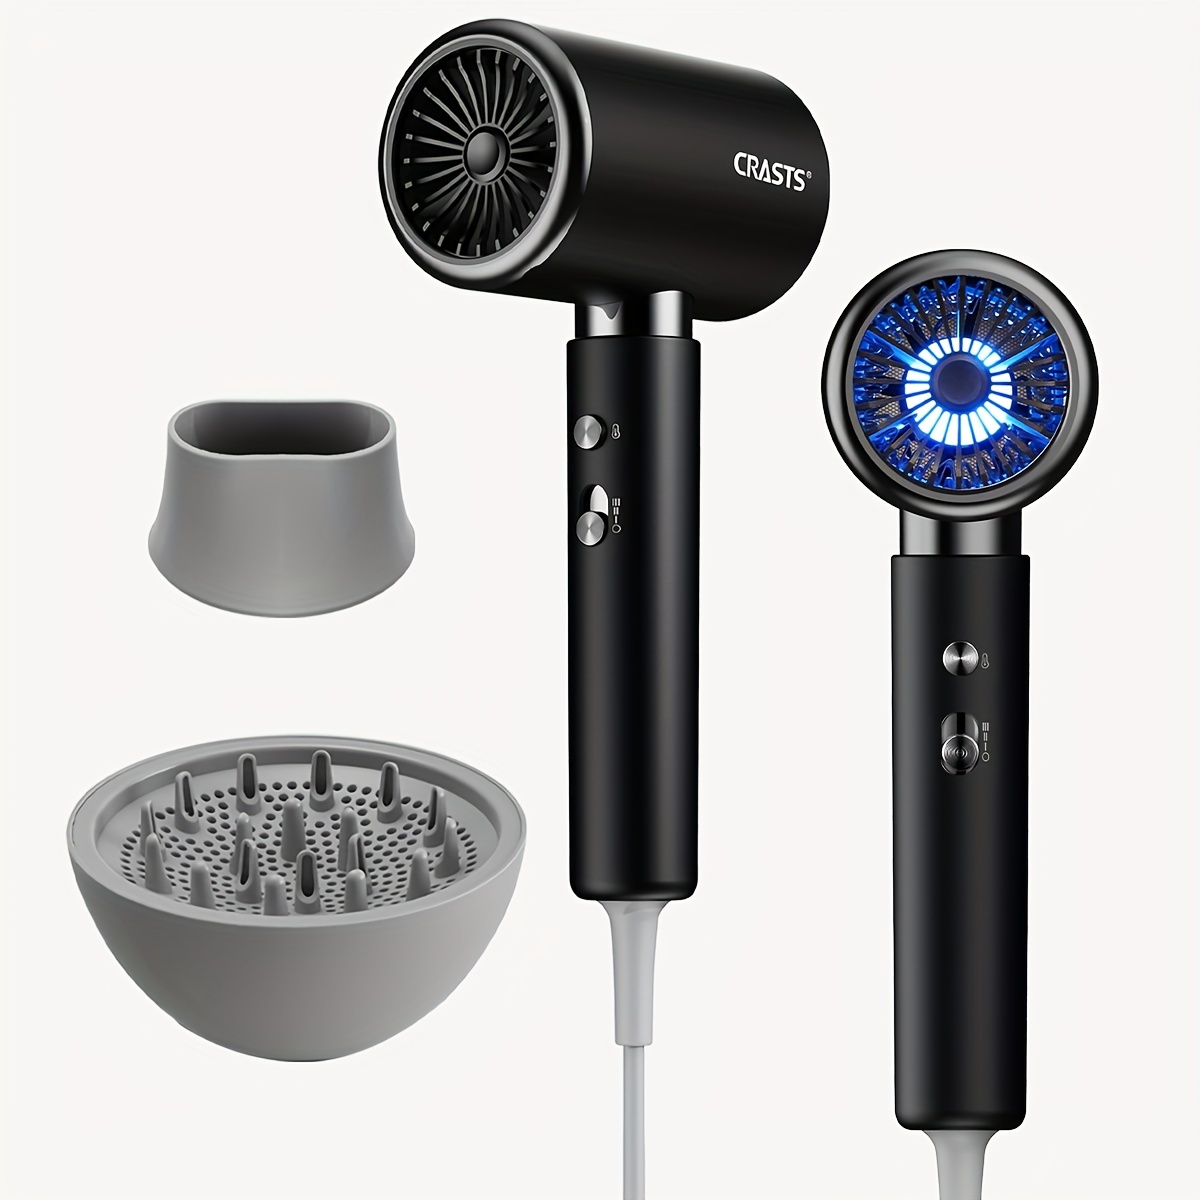 

Professional Hair Dryer For Home And Salon Use, High-power, Ionic Care, With Concentrator Nozzle And Diffuser